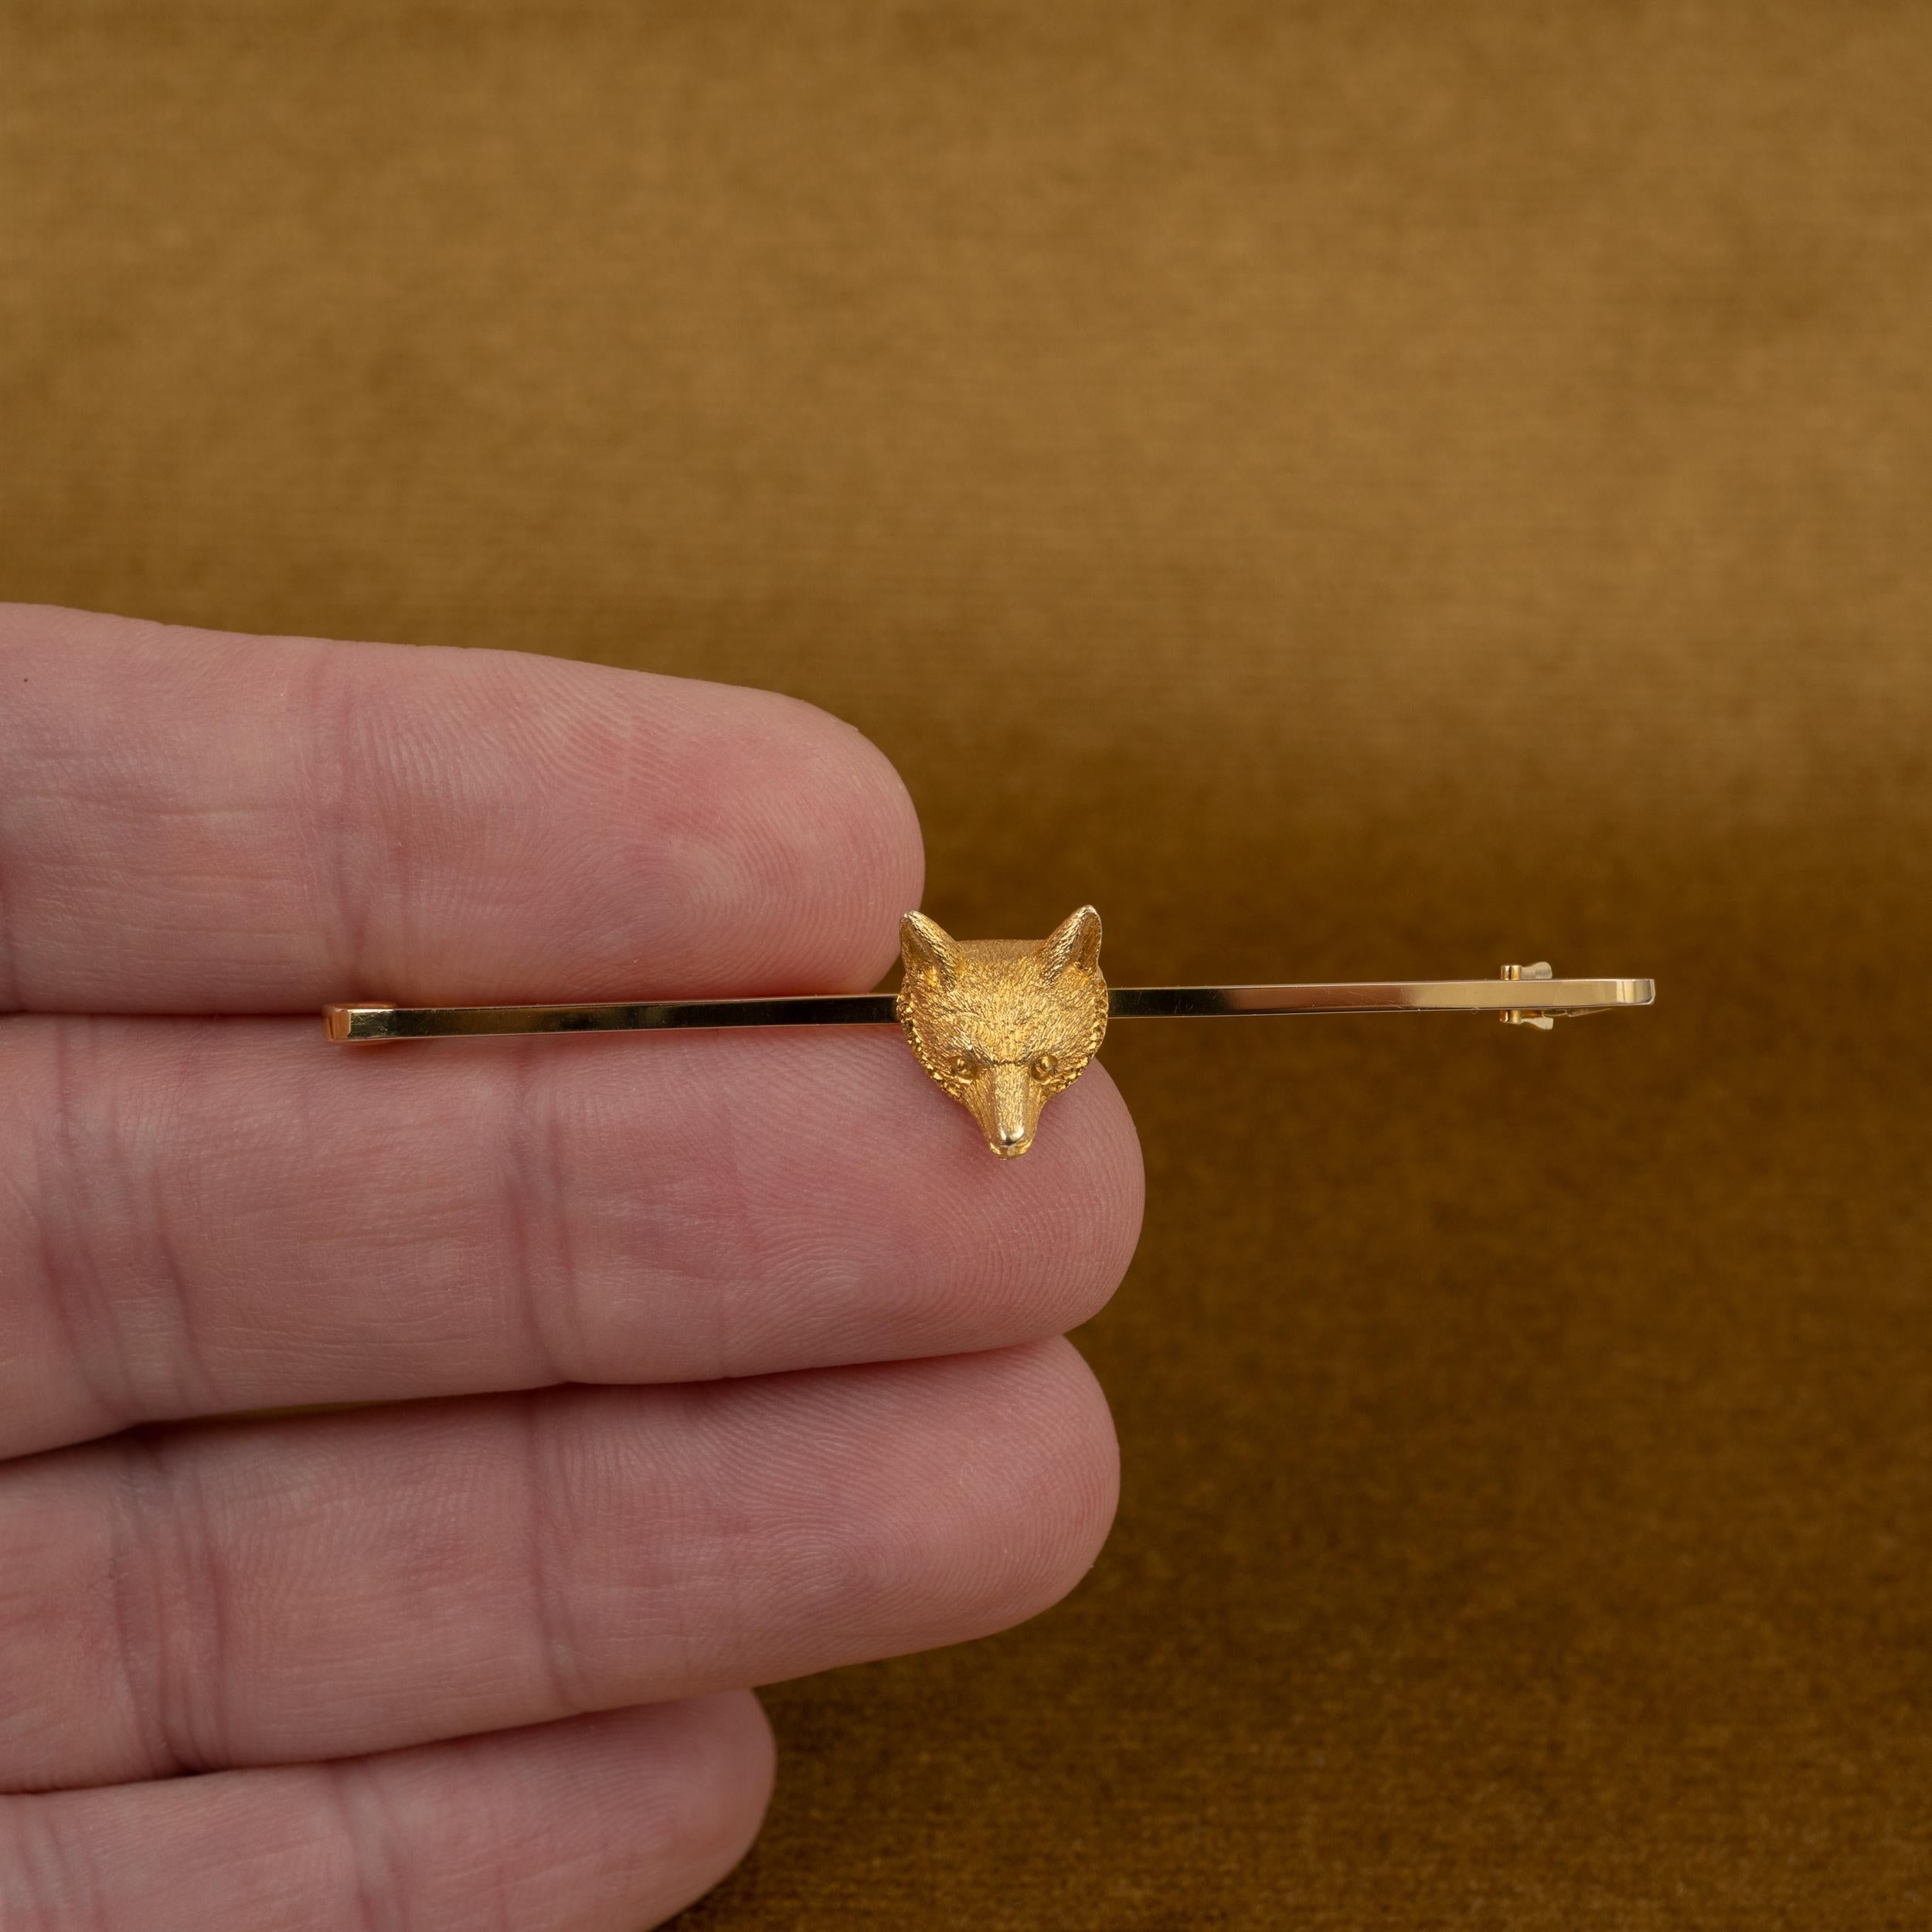 This fabulous quality antique fox head bar brooch is crafted in 15k yellow gold and dates back to the English Art Deco period. The solid gold fox head sits centrally on a rectangular smooth gold bar and is superbly engraved with fur textured